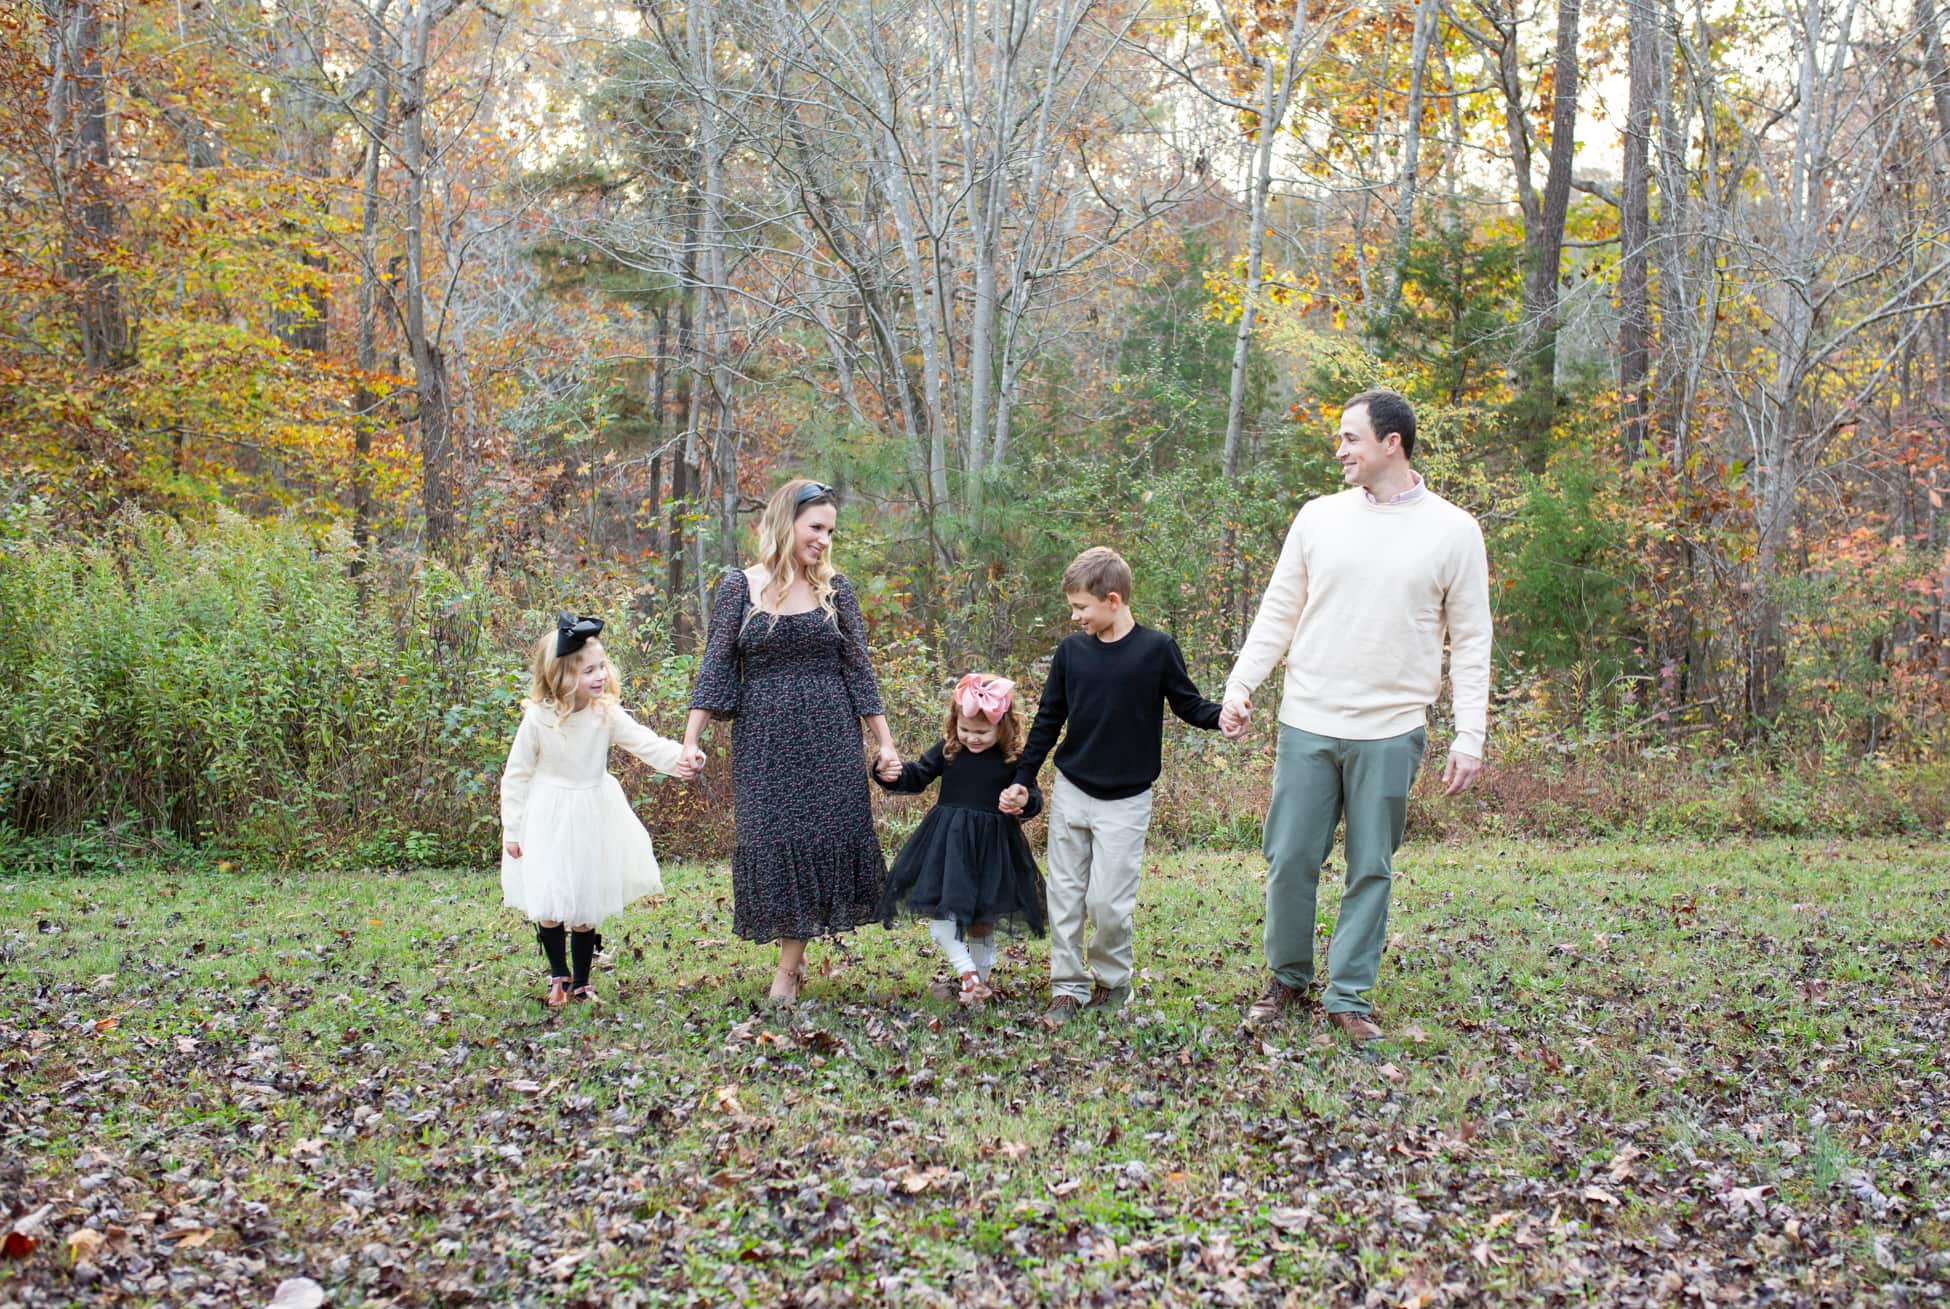 A family of 5 walking in a park during fall season in North Carolina